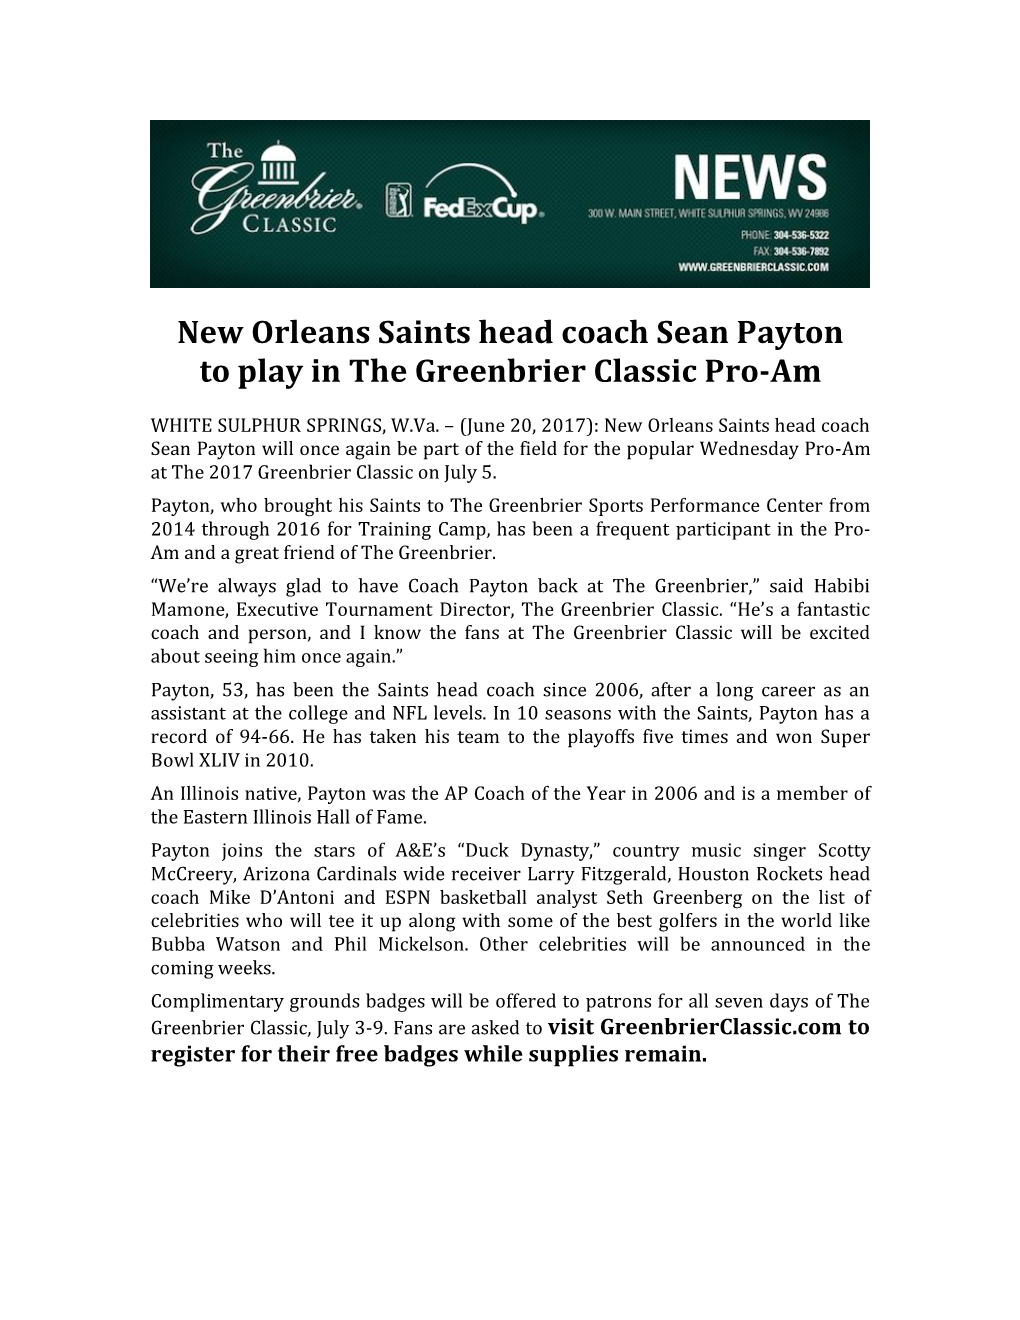 New Orleans Saints Head Coach Sean Payton to Play in the Greenbrier Classic Pro-Am